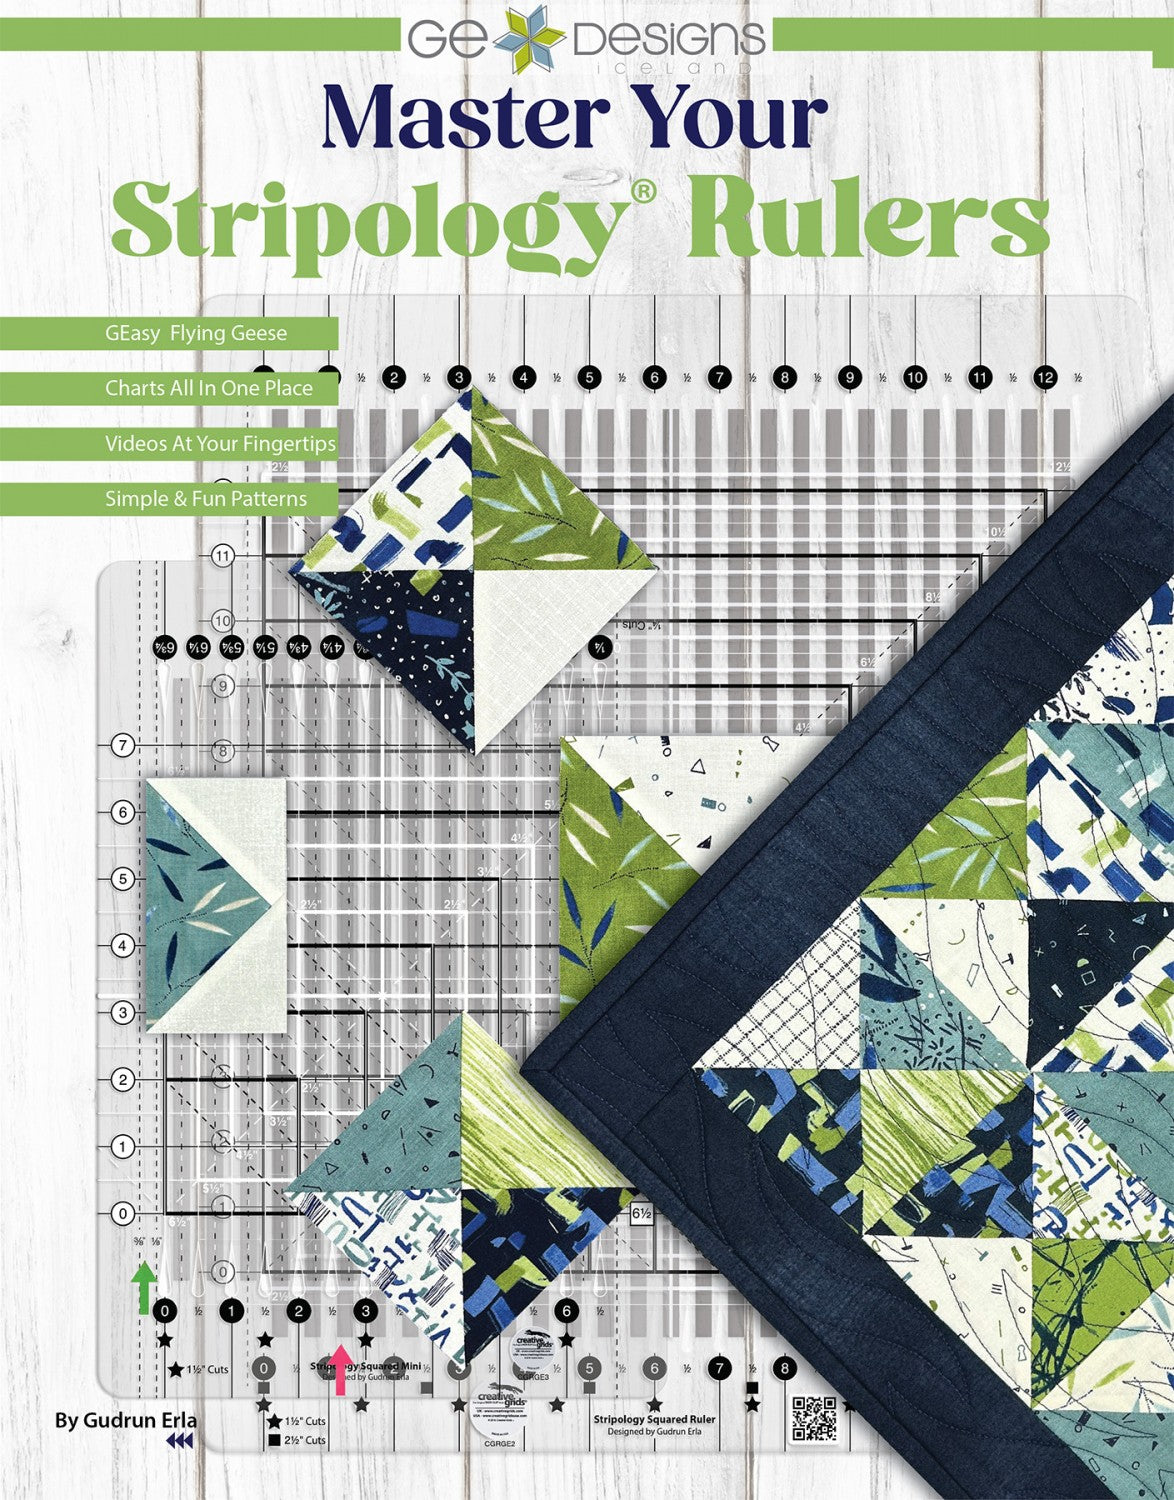 Master Your Stripology Rulers Book by Gudrun Erla of G.E. Designs